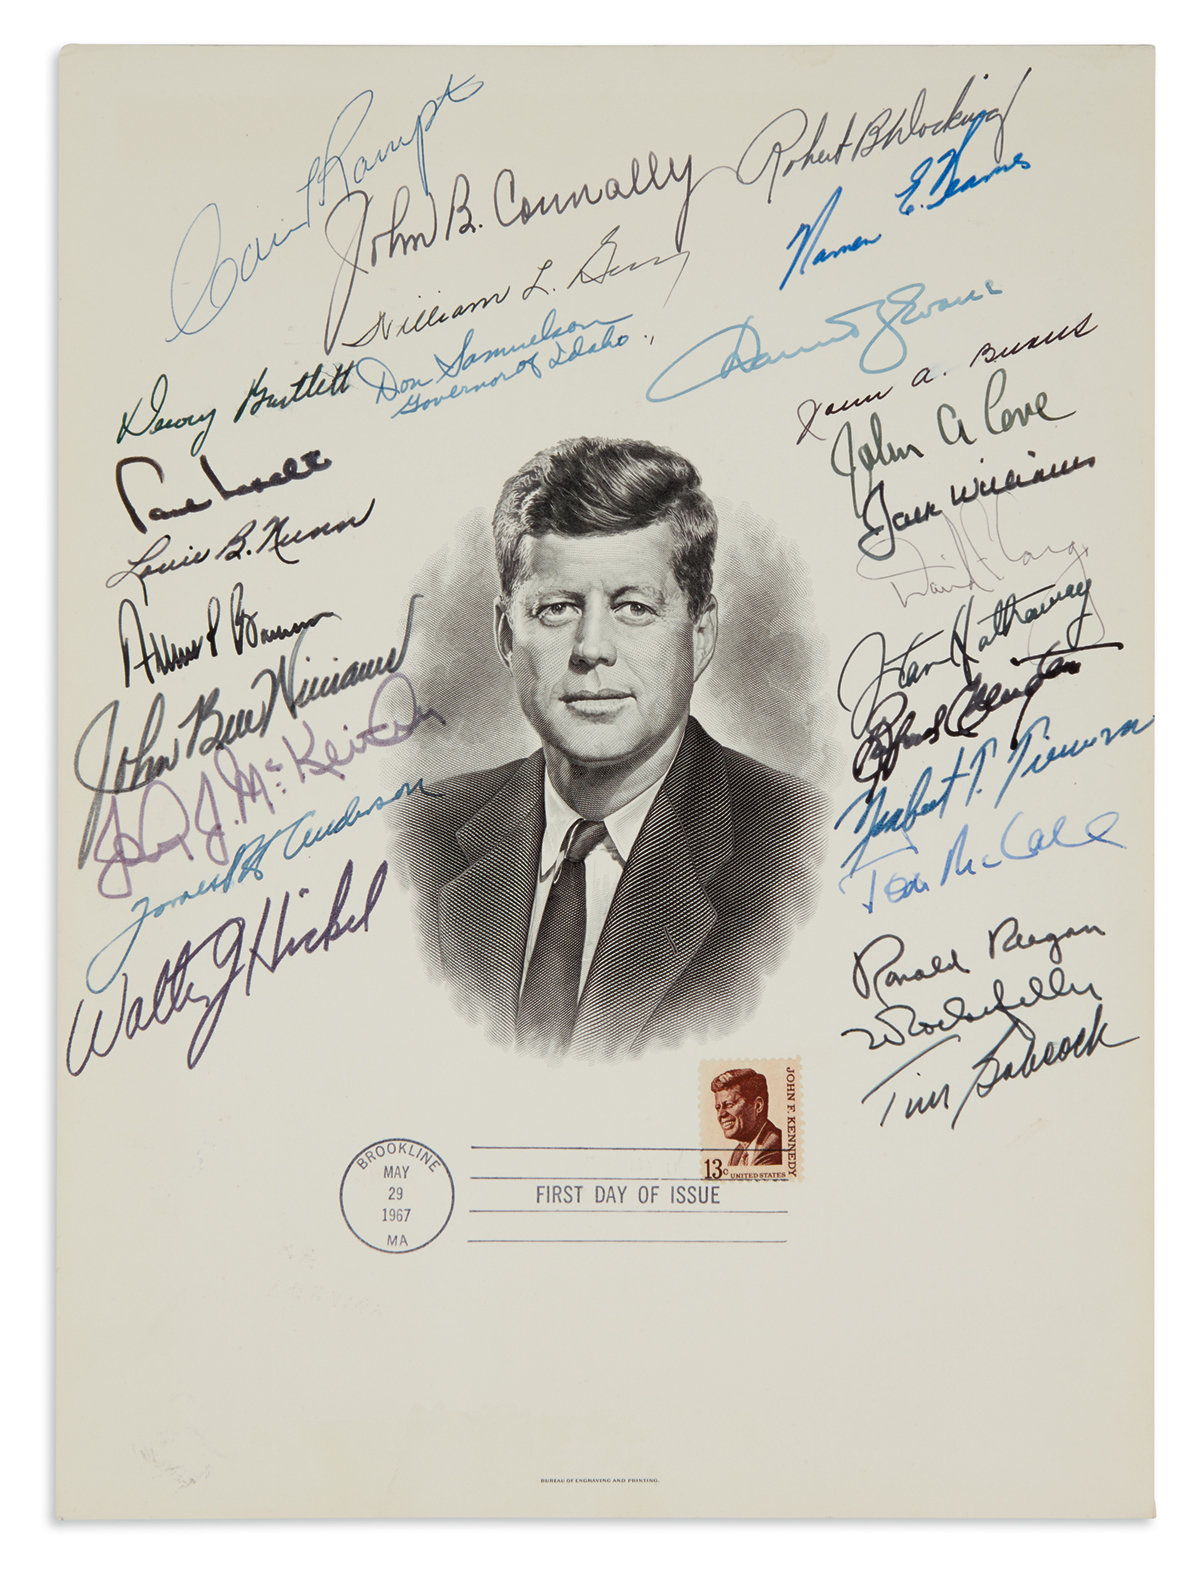 (GOVERNORS.) REAGAN, RONALD. Engraved bust portrait of John F. Kennedy Signed by Reagan and 24 State Governors or Lieutenant Governors.